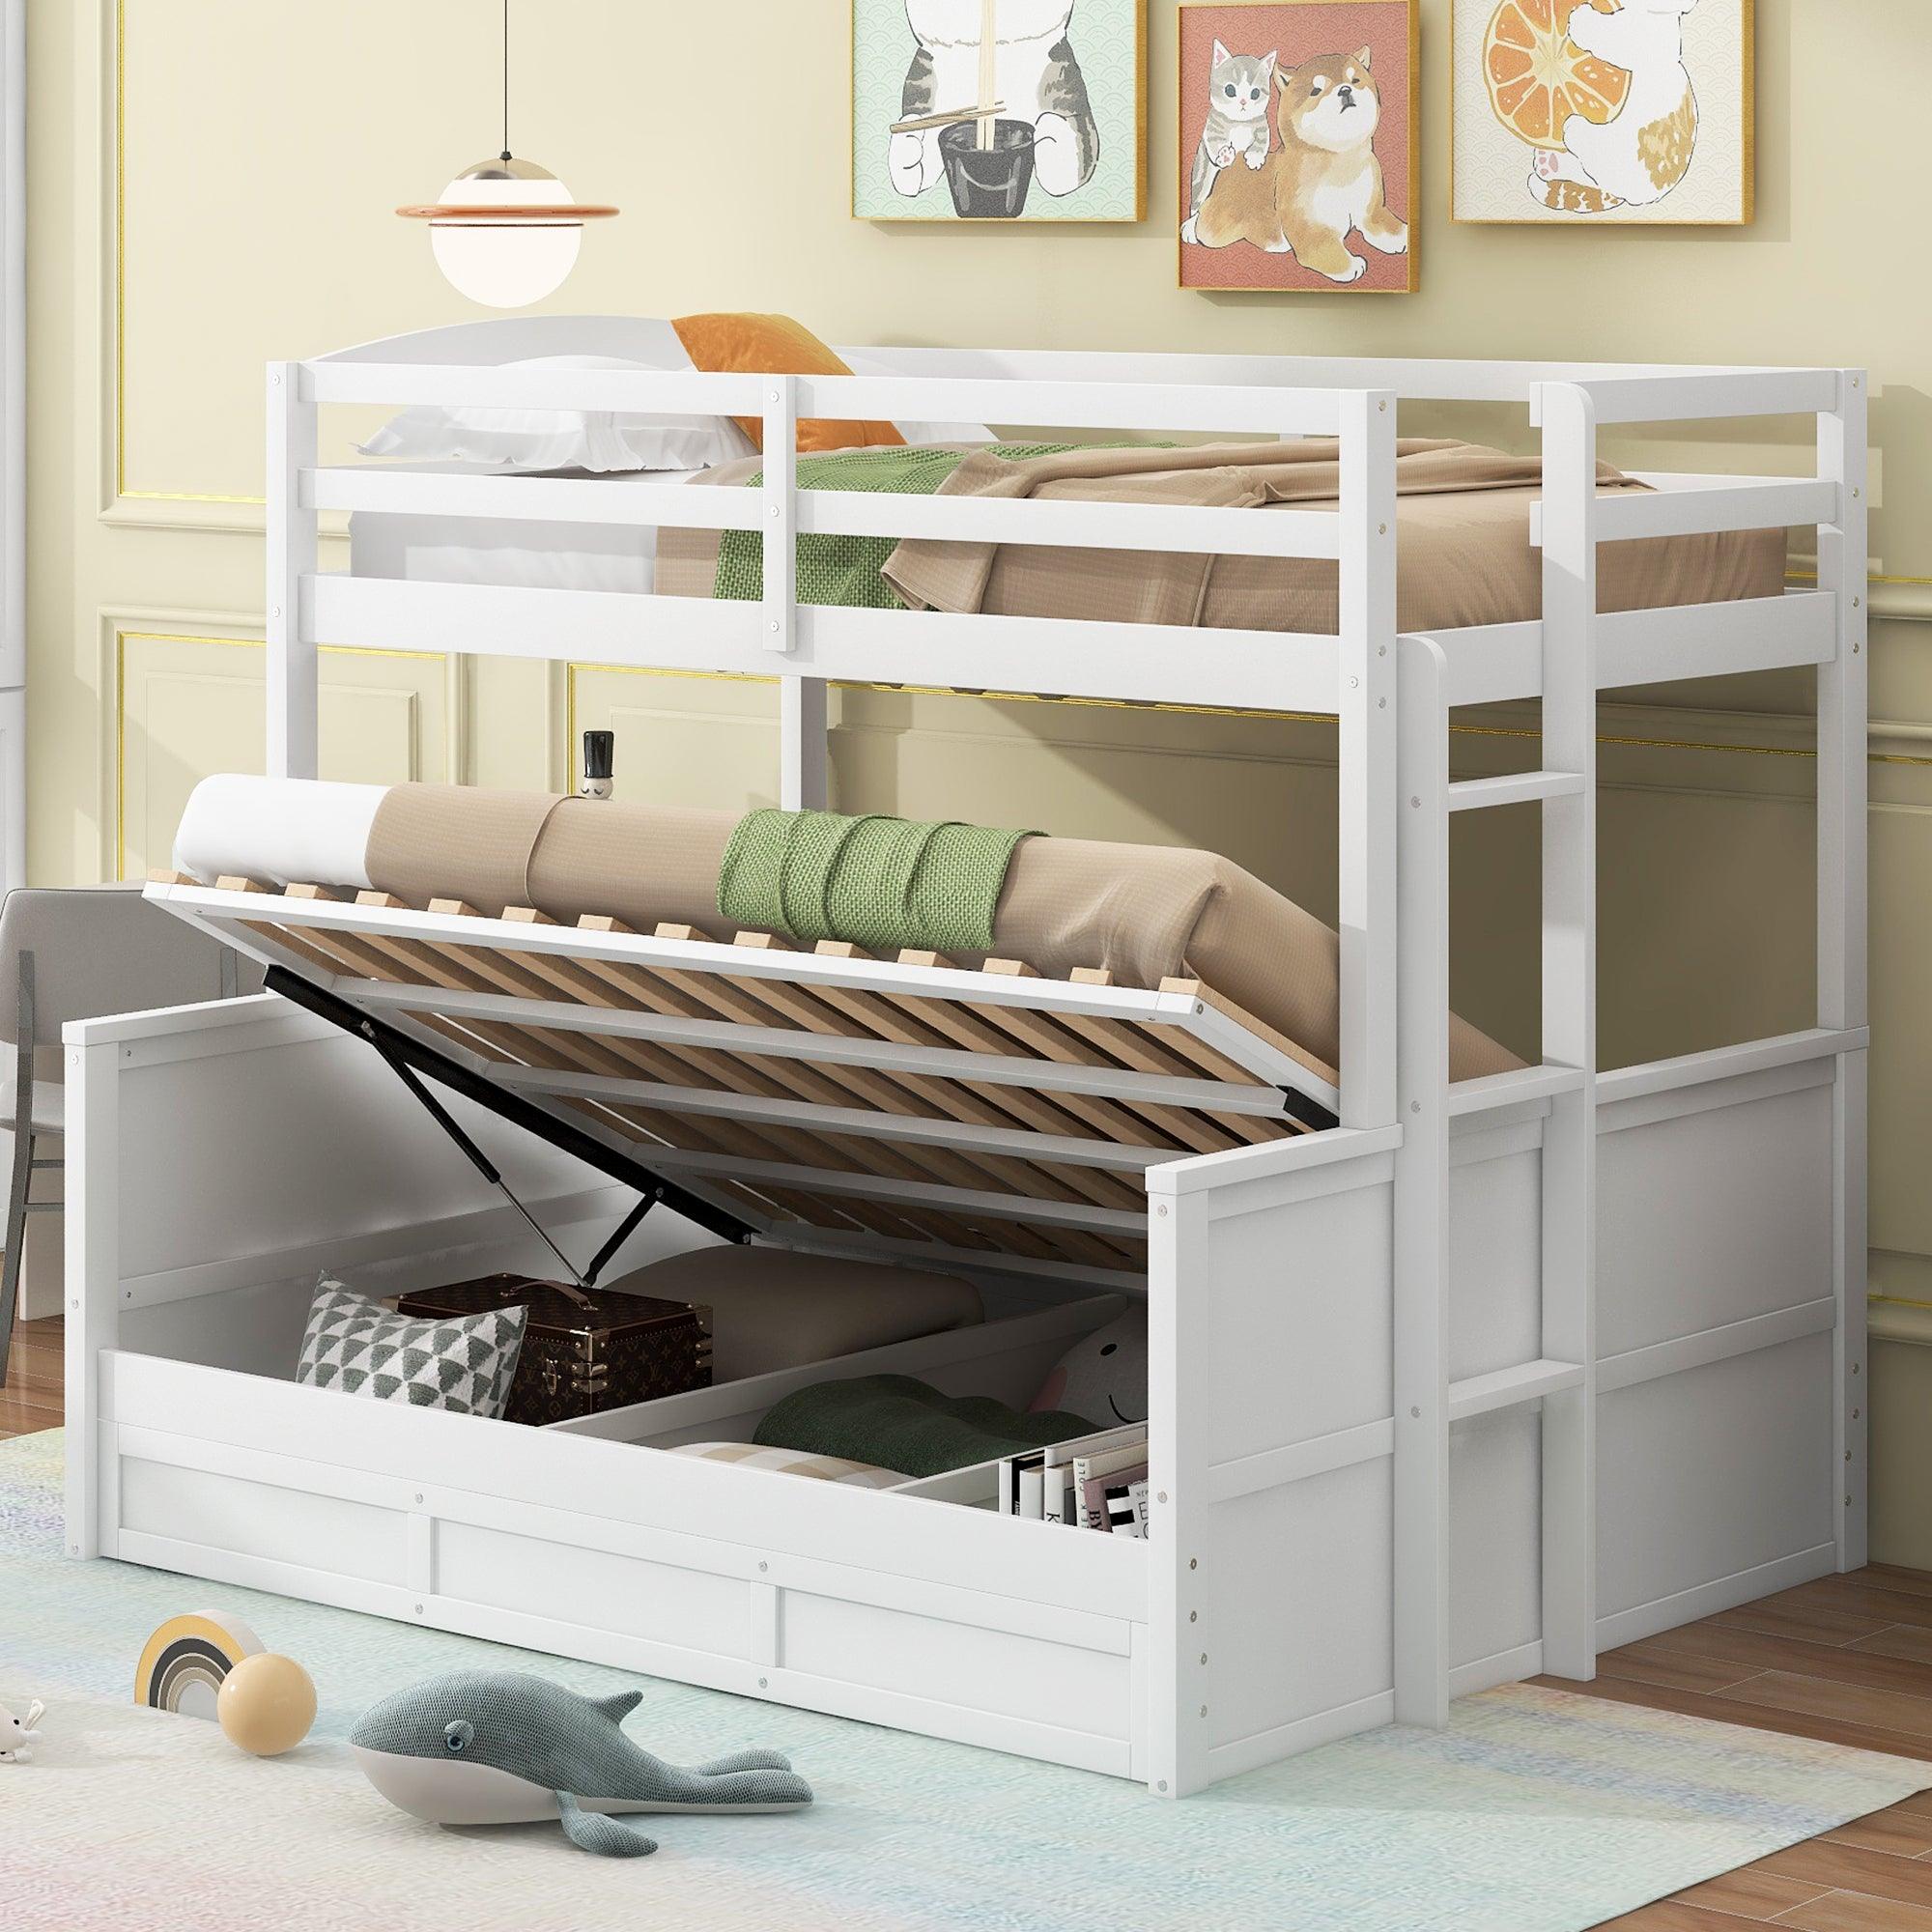 🆓🚛 Wood Twin Over Full Bunk Bed With Hydraulic Lift Up Storage, White